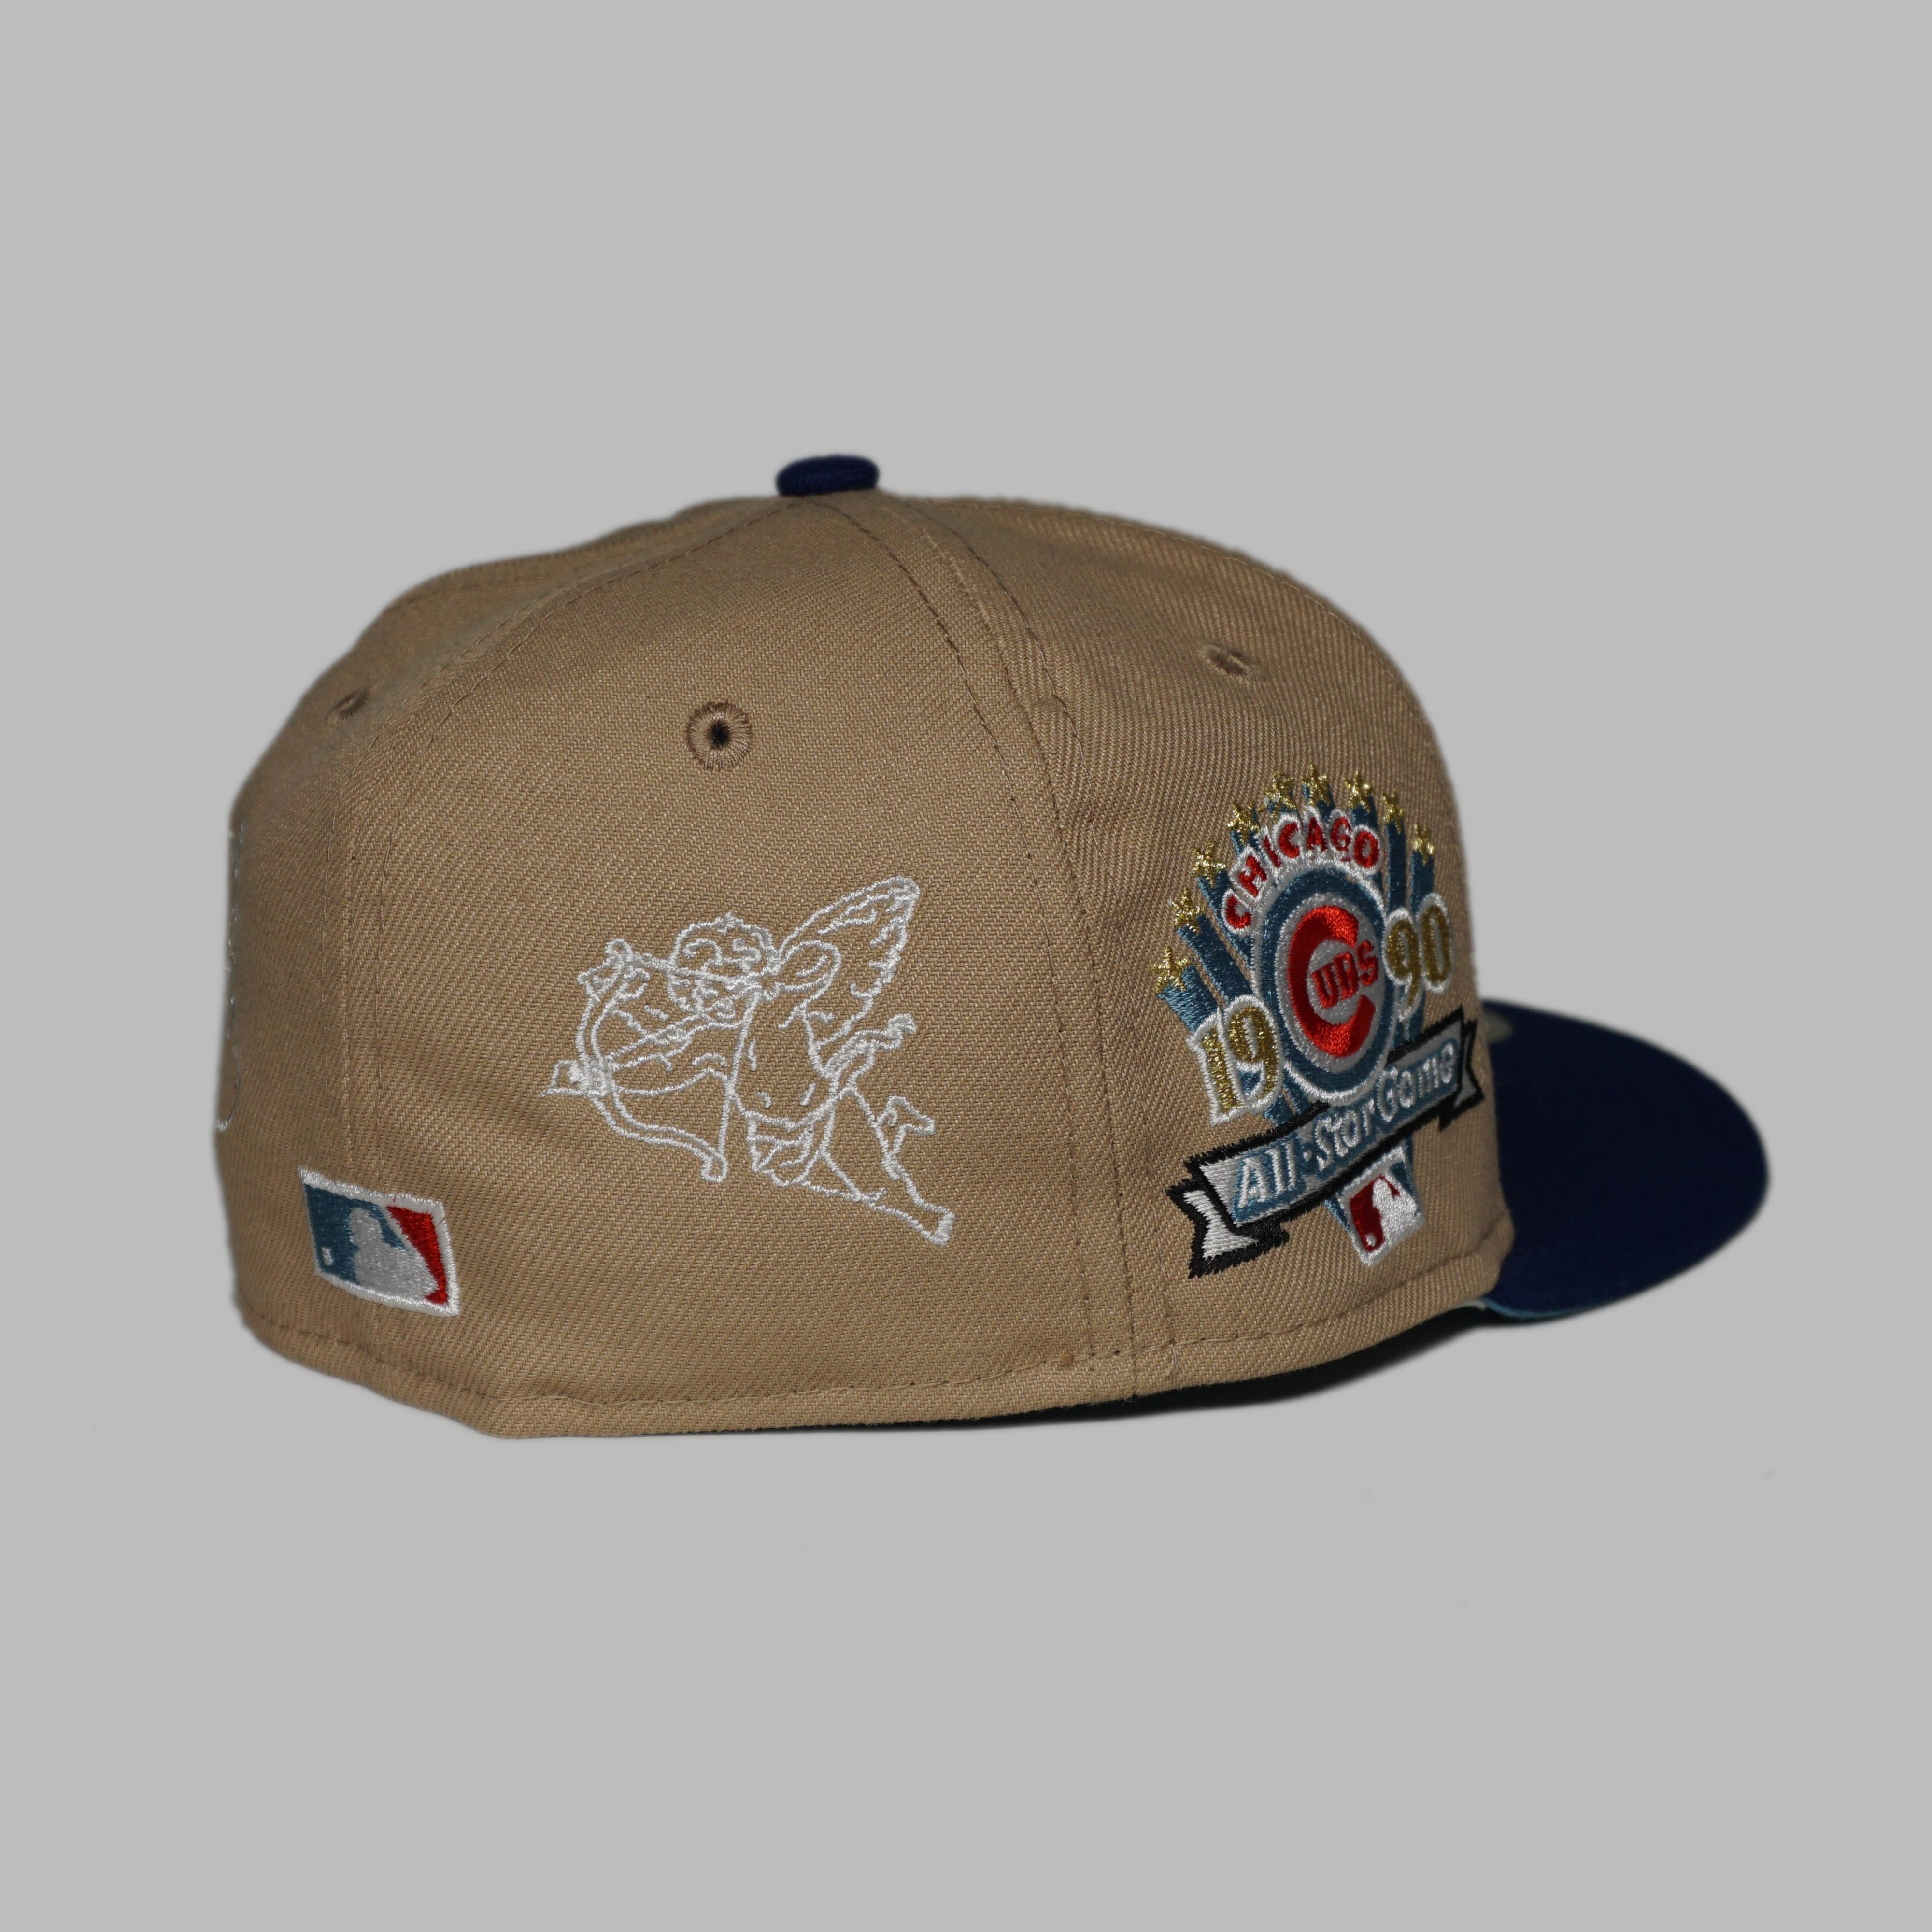 BROWN HOLY FITTED (size 7)